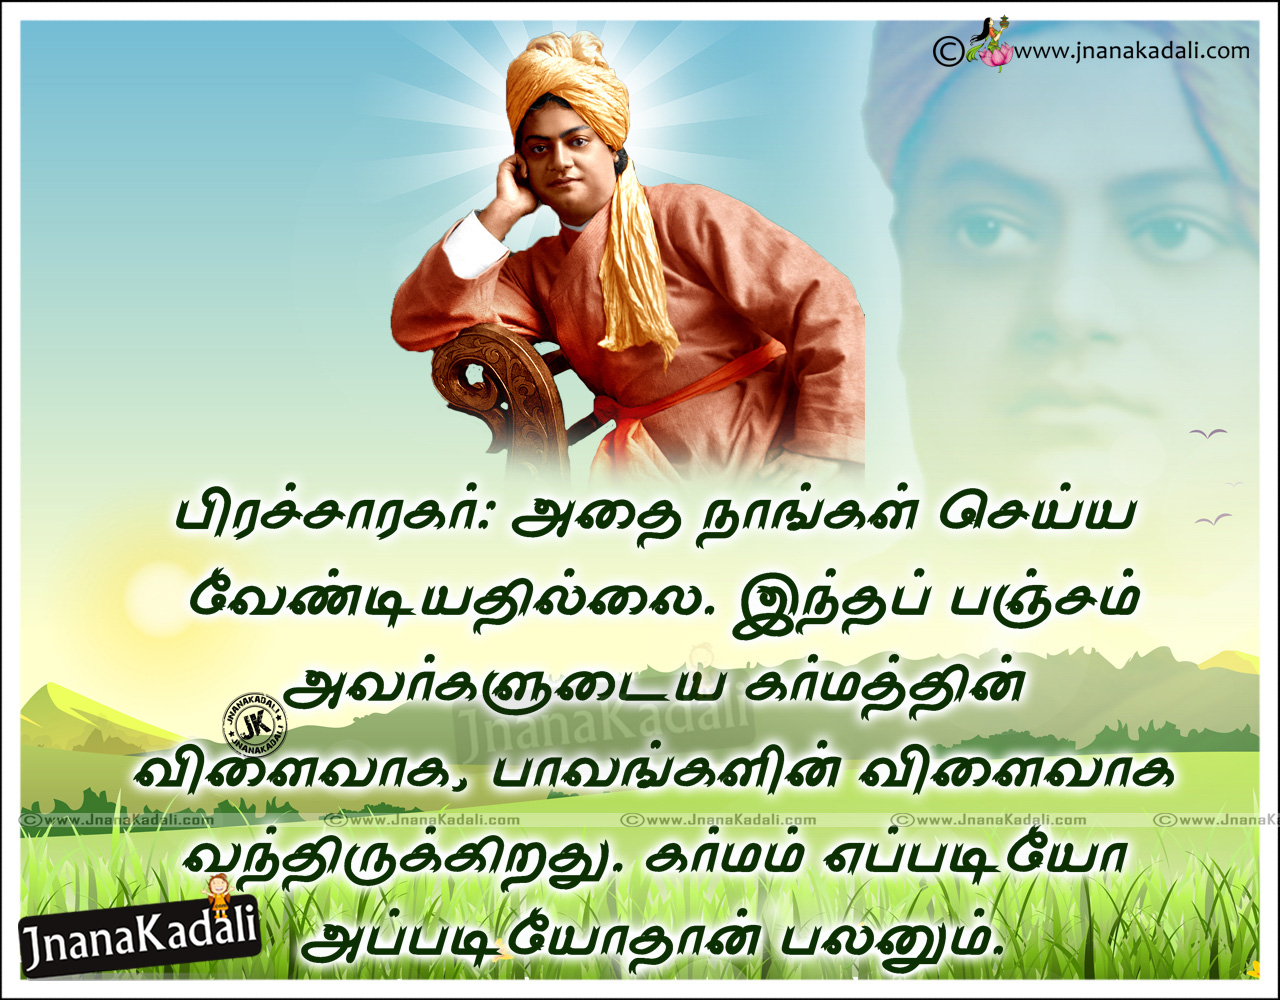 Good morning Tamil Quotes With Swami Vivekananda Golden words images